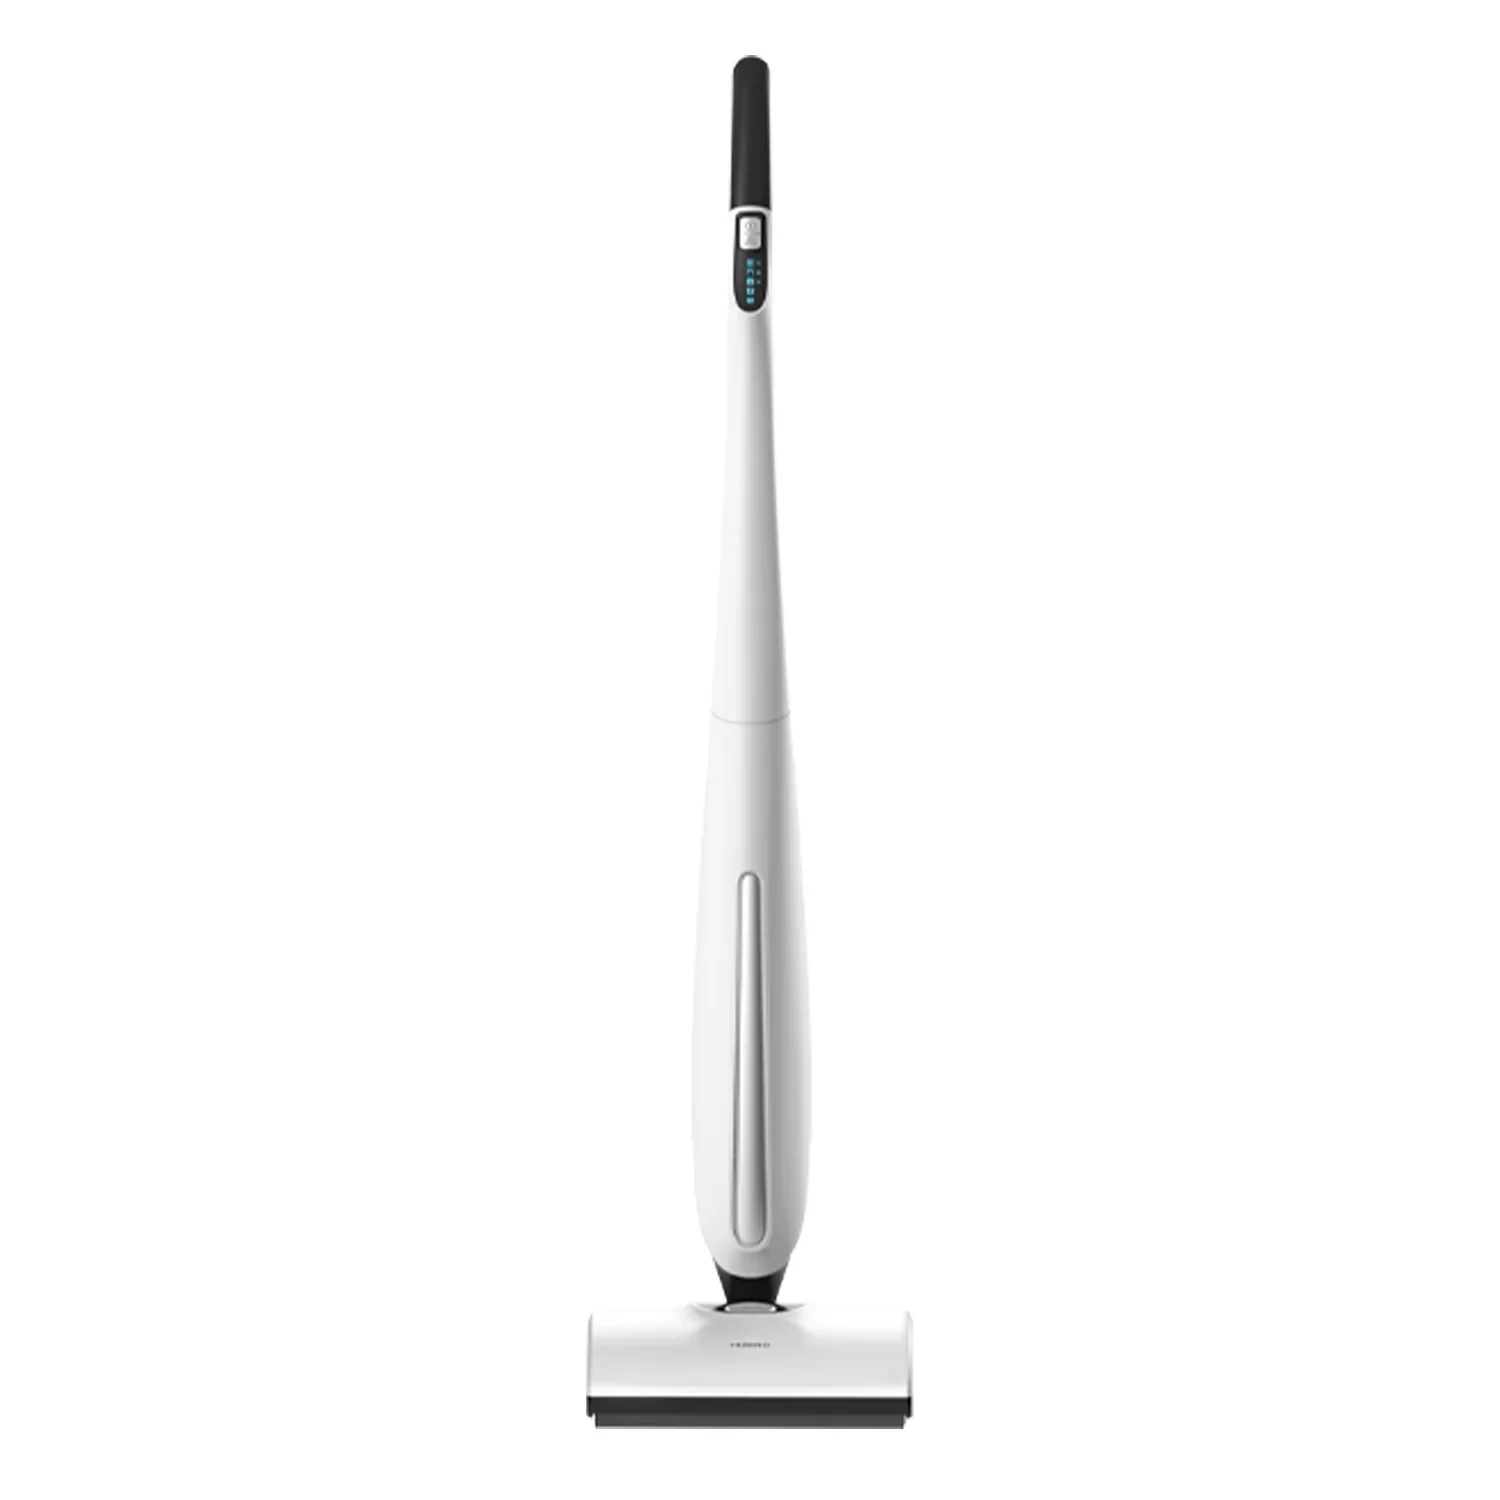 Hizero Bionic Hard Floor Cleaner Model F803 (Special Order Only)